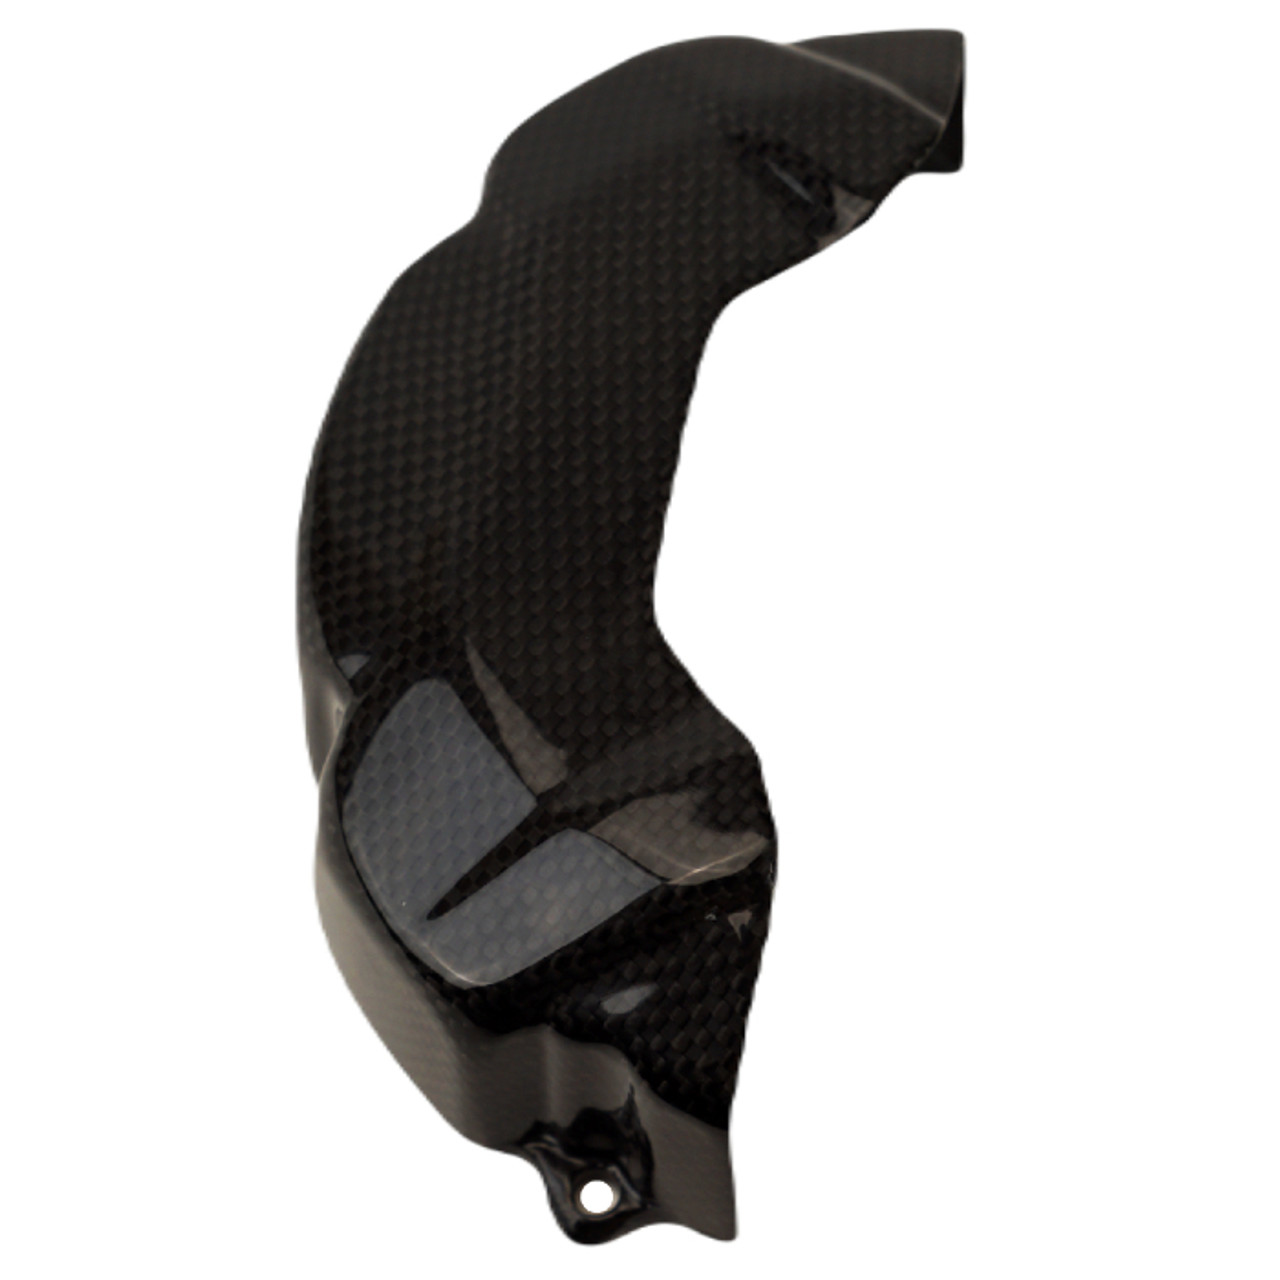 Clutch Cover in Glossy Plain Weave Carbon Fiber for Ducati Monster + (937)